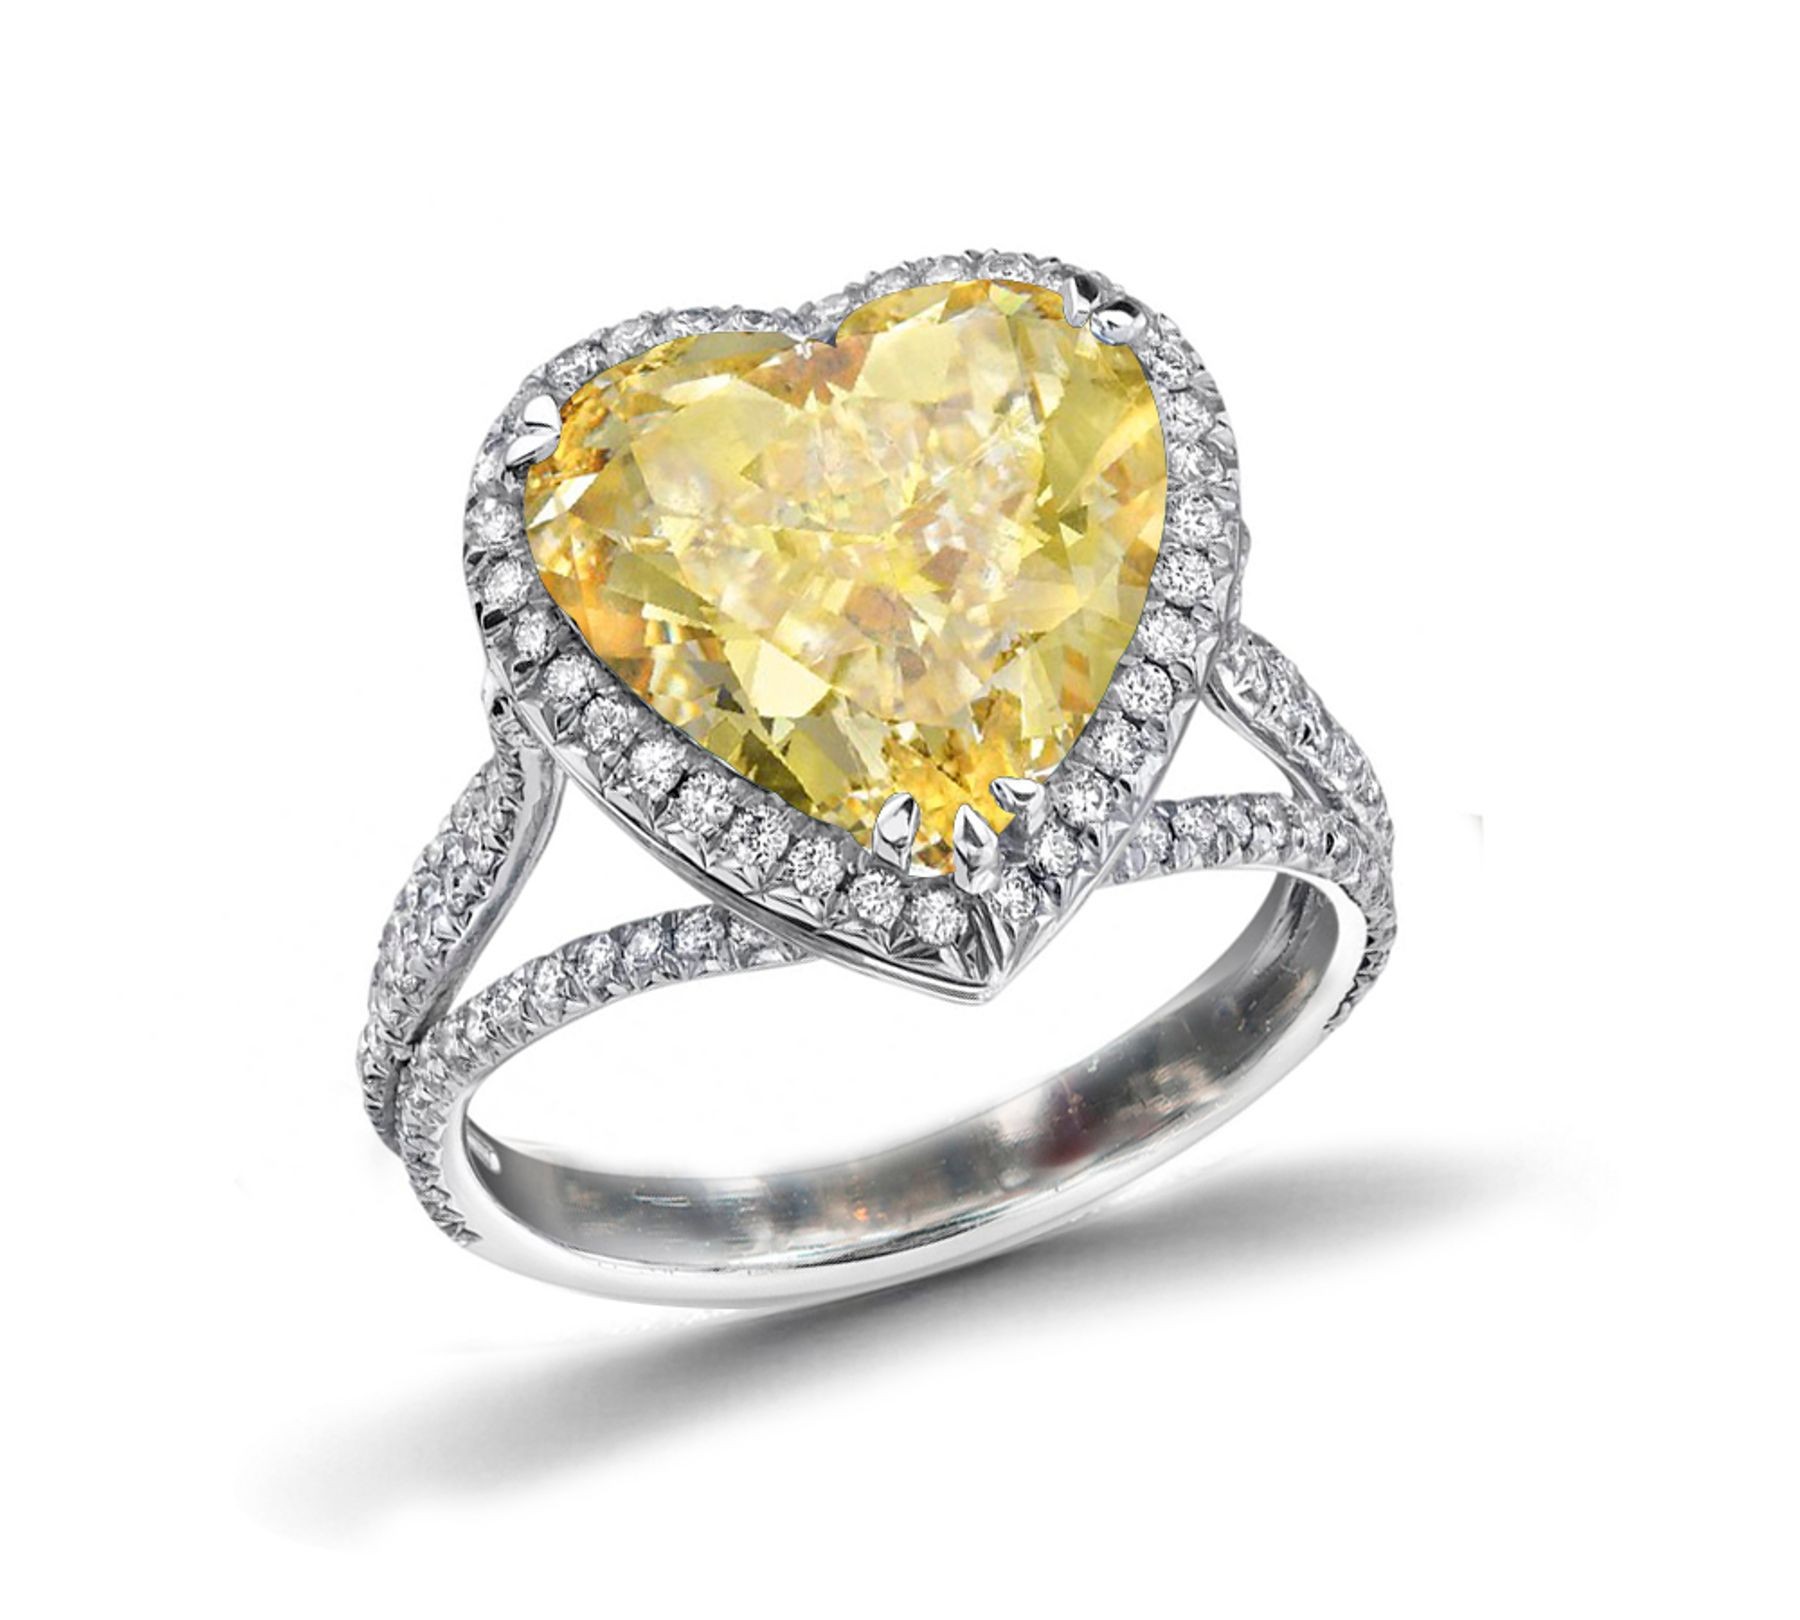 Latest Addition Ring with Heart Yellow Sapphire & Pave Set White Diamonds in Gold or Platinum